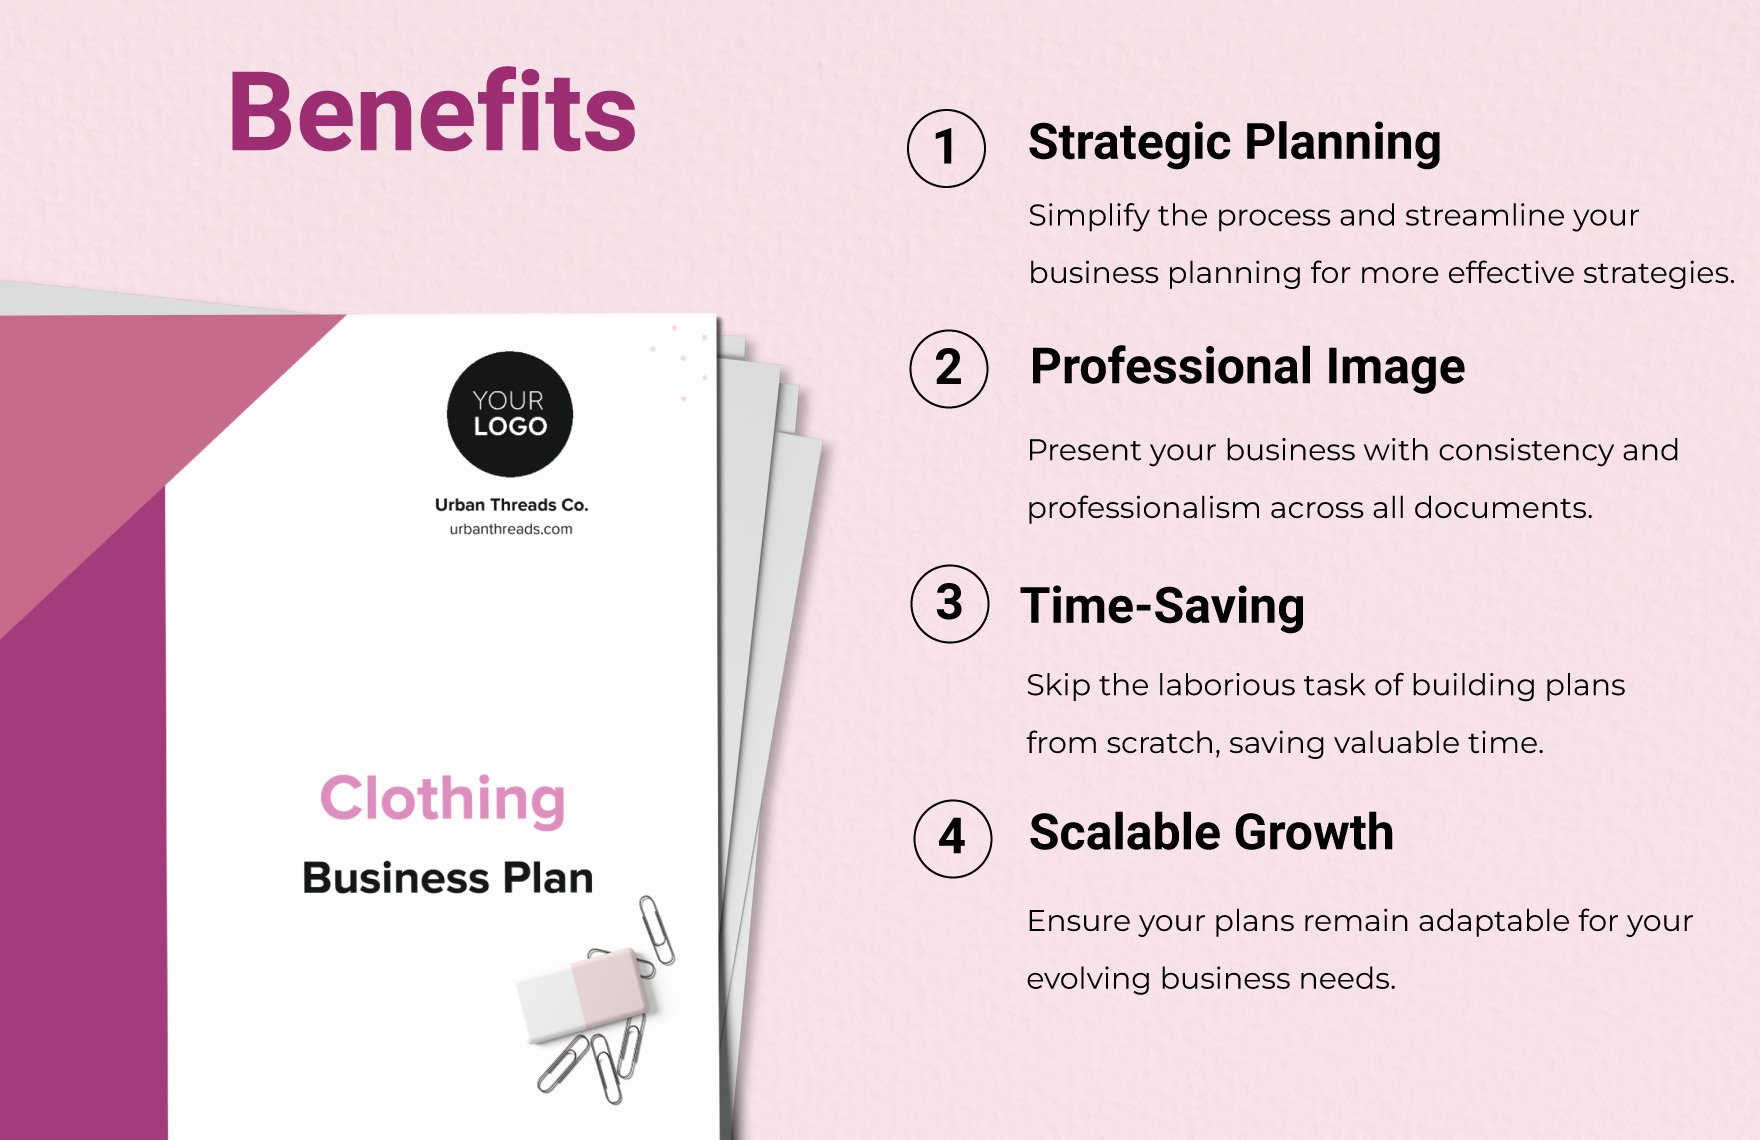 Clothing Business Plan Template